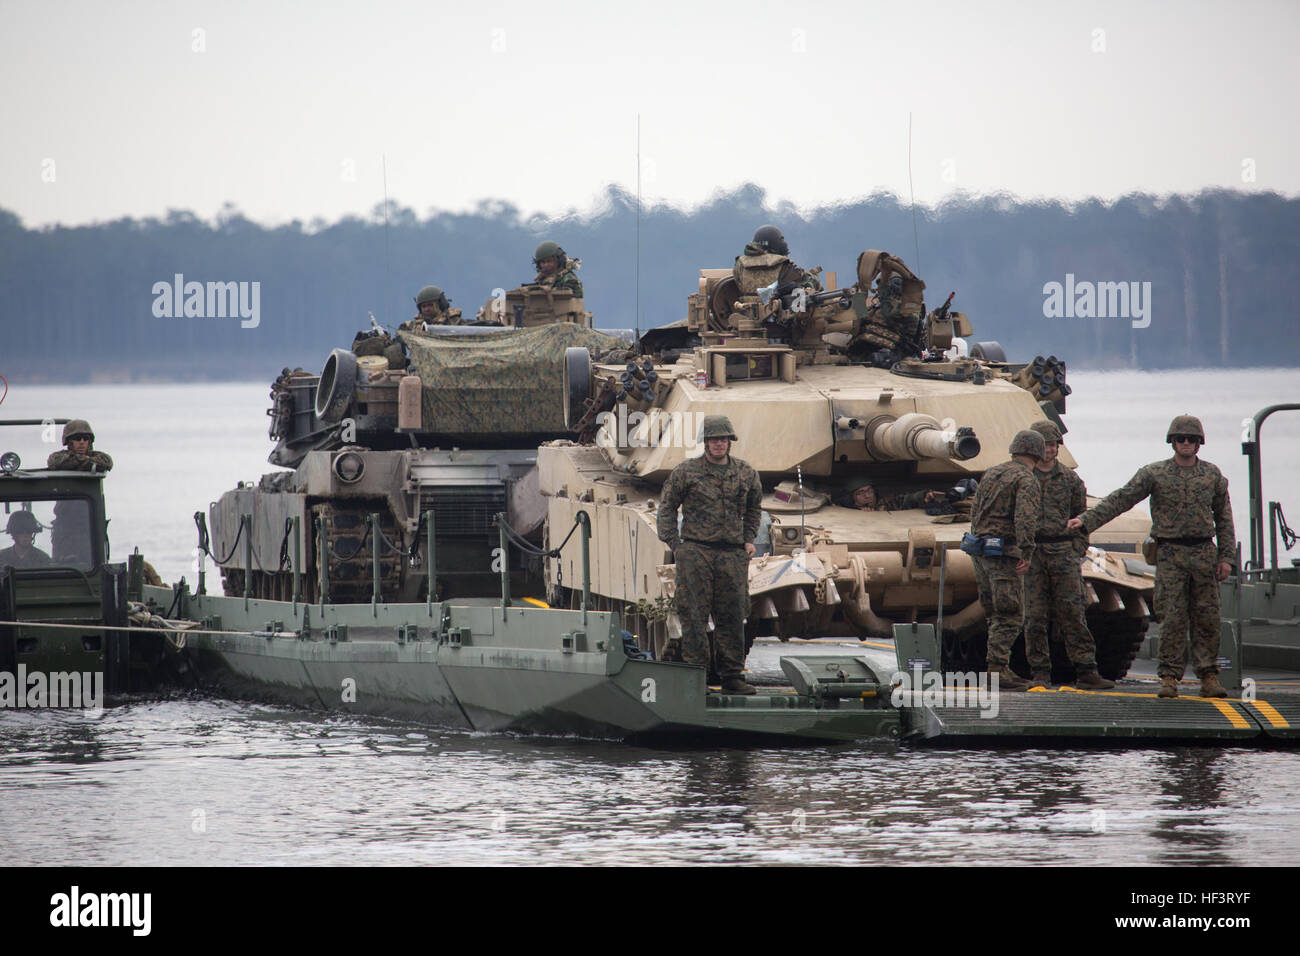 U.S. Marines with 2d Tank Battalion, 2d Marine Division (2D MARDIV), and 2d Assault Amphibian Battalion, 2D MARDIV, transport M1A1 Abrams tanks across a river with a seven bay raft system during the Iron Blitz field training exercise on Camp Lejeune, N.C., Feb. 22, 2016. The exercise was conducted increase the Marines proficiency in both offensive and defensive operations on unfamiliar terrain. (U.S. Marine Corps photo by Lance Cpl. Abraham Lopez, 2D MARDIV Combat Camera/Released) Iron Blitz Field Exercise 160222-M-MN519-166 Stock Photo